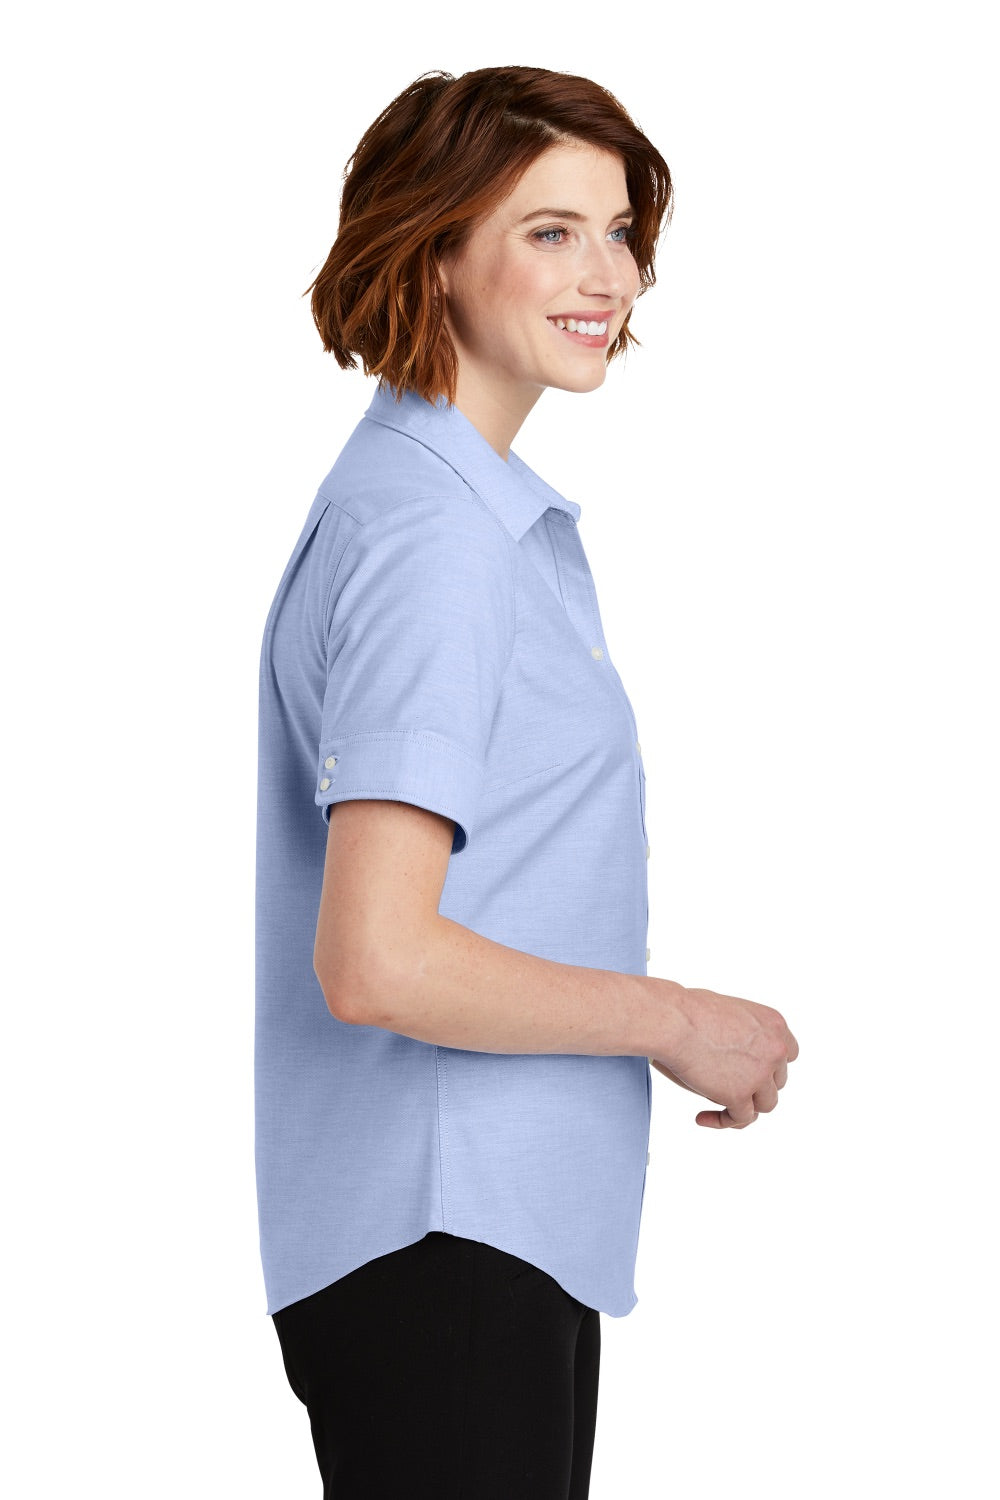 Port Authority L659 Womens SuperPro Oxford Wrinkle Resistant Short Sleeve Button Down Shirt w/ Pocket Oxford Blue Side